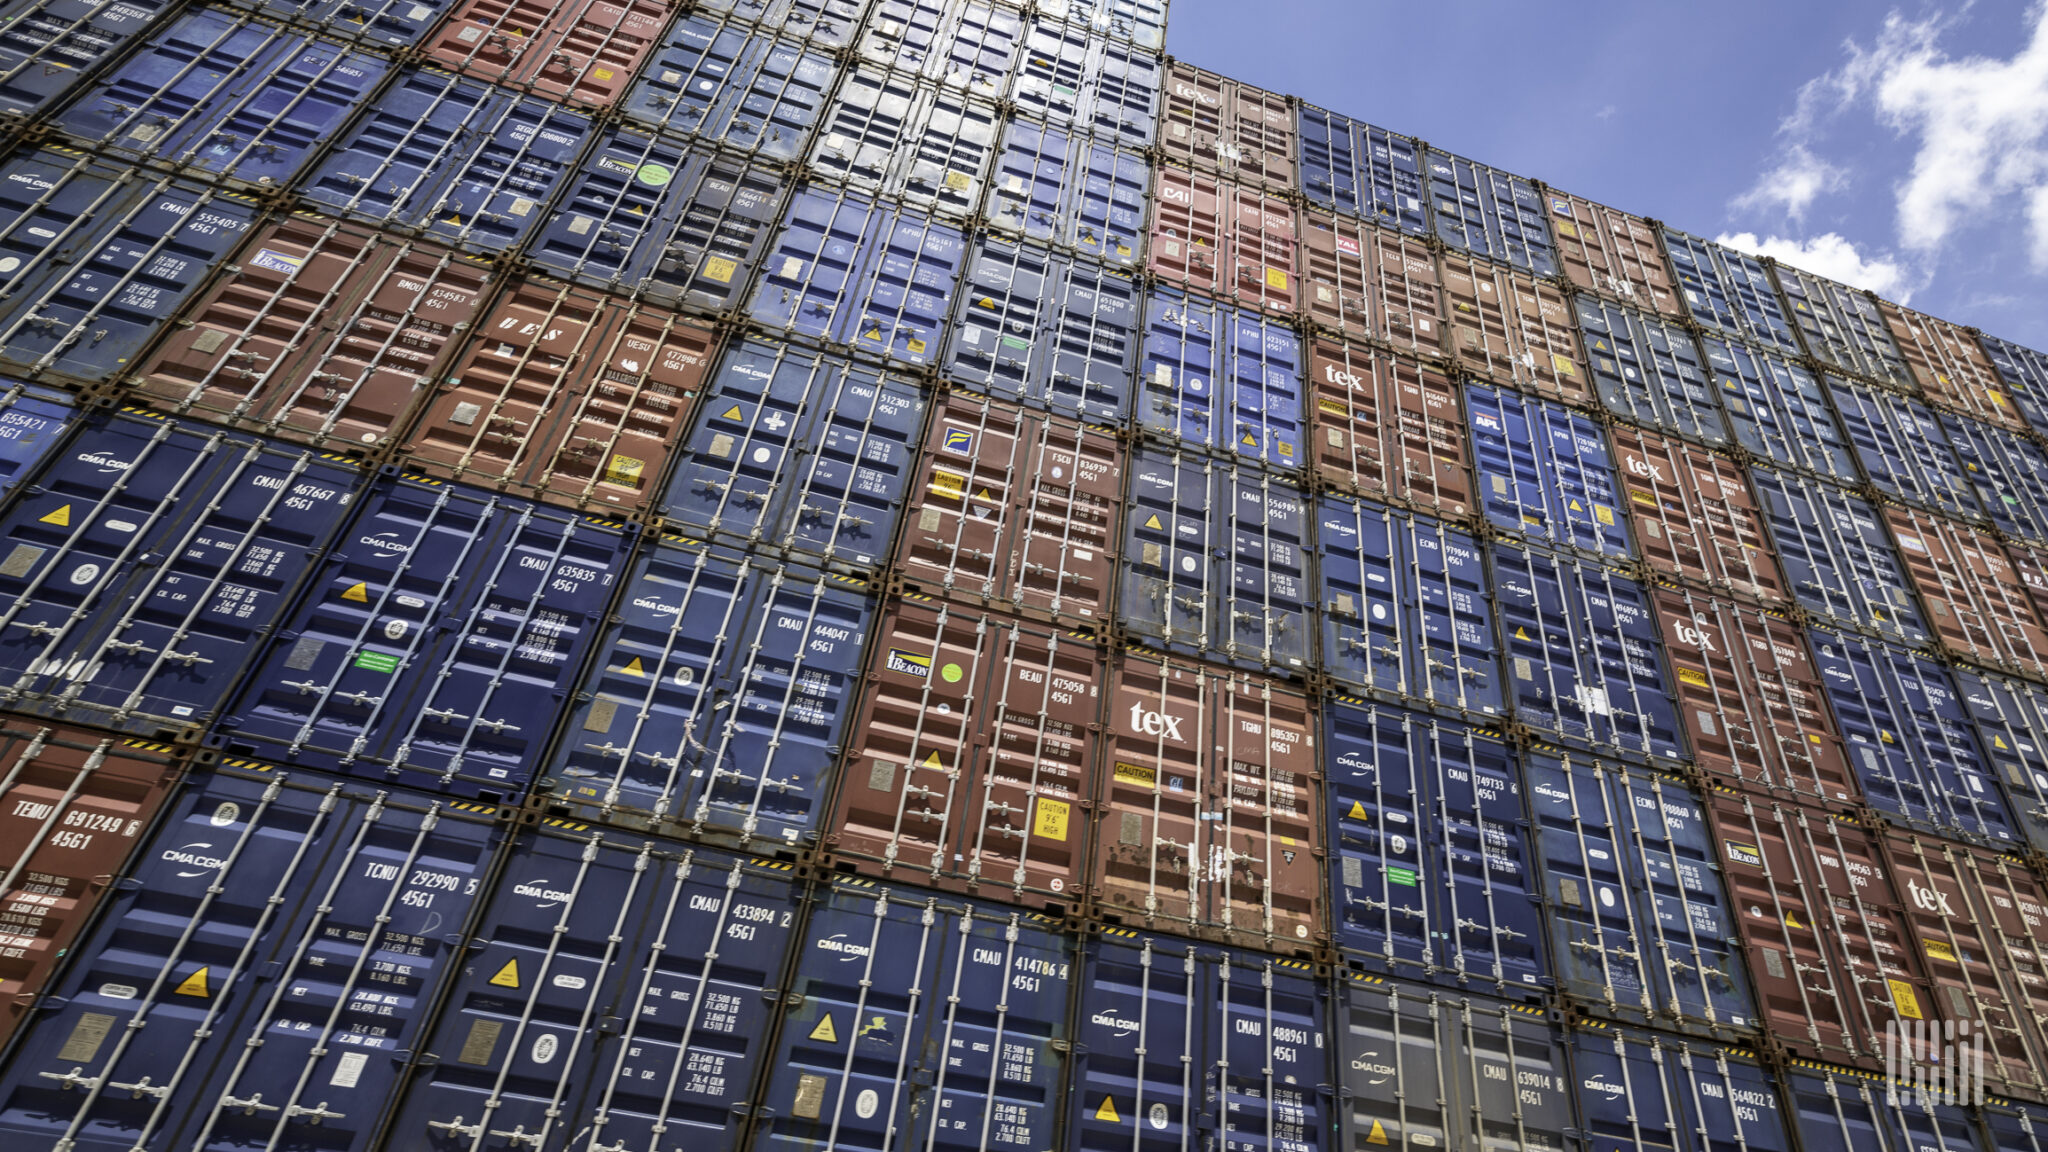 Containers are being built at a record pace. It’s still not enough